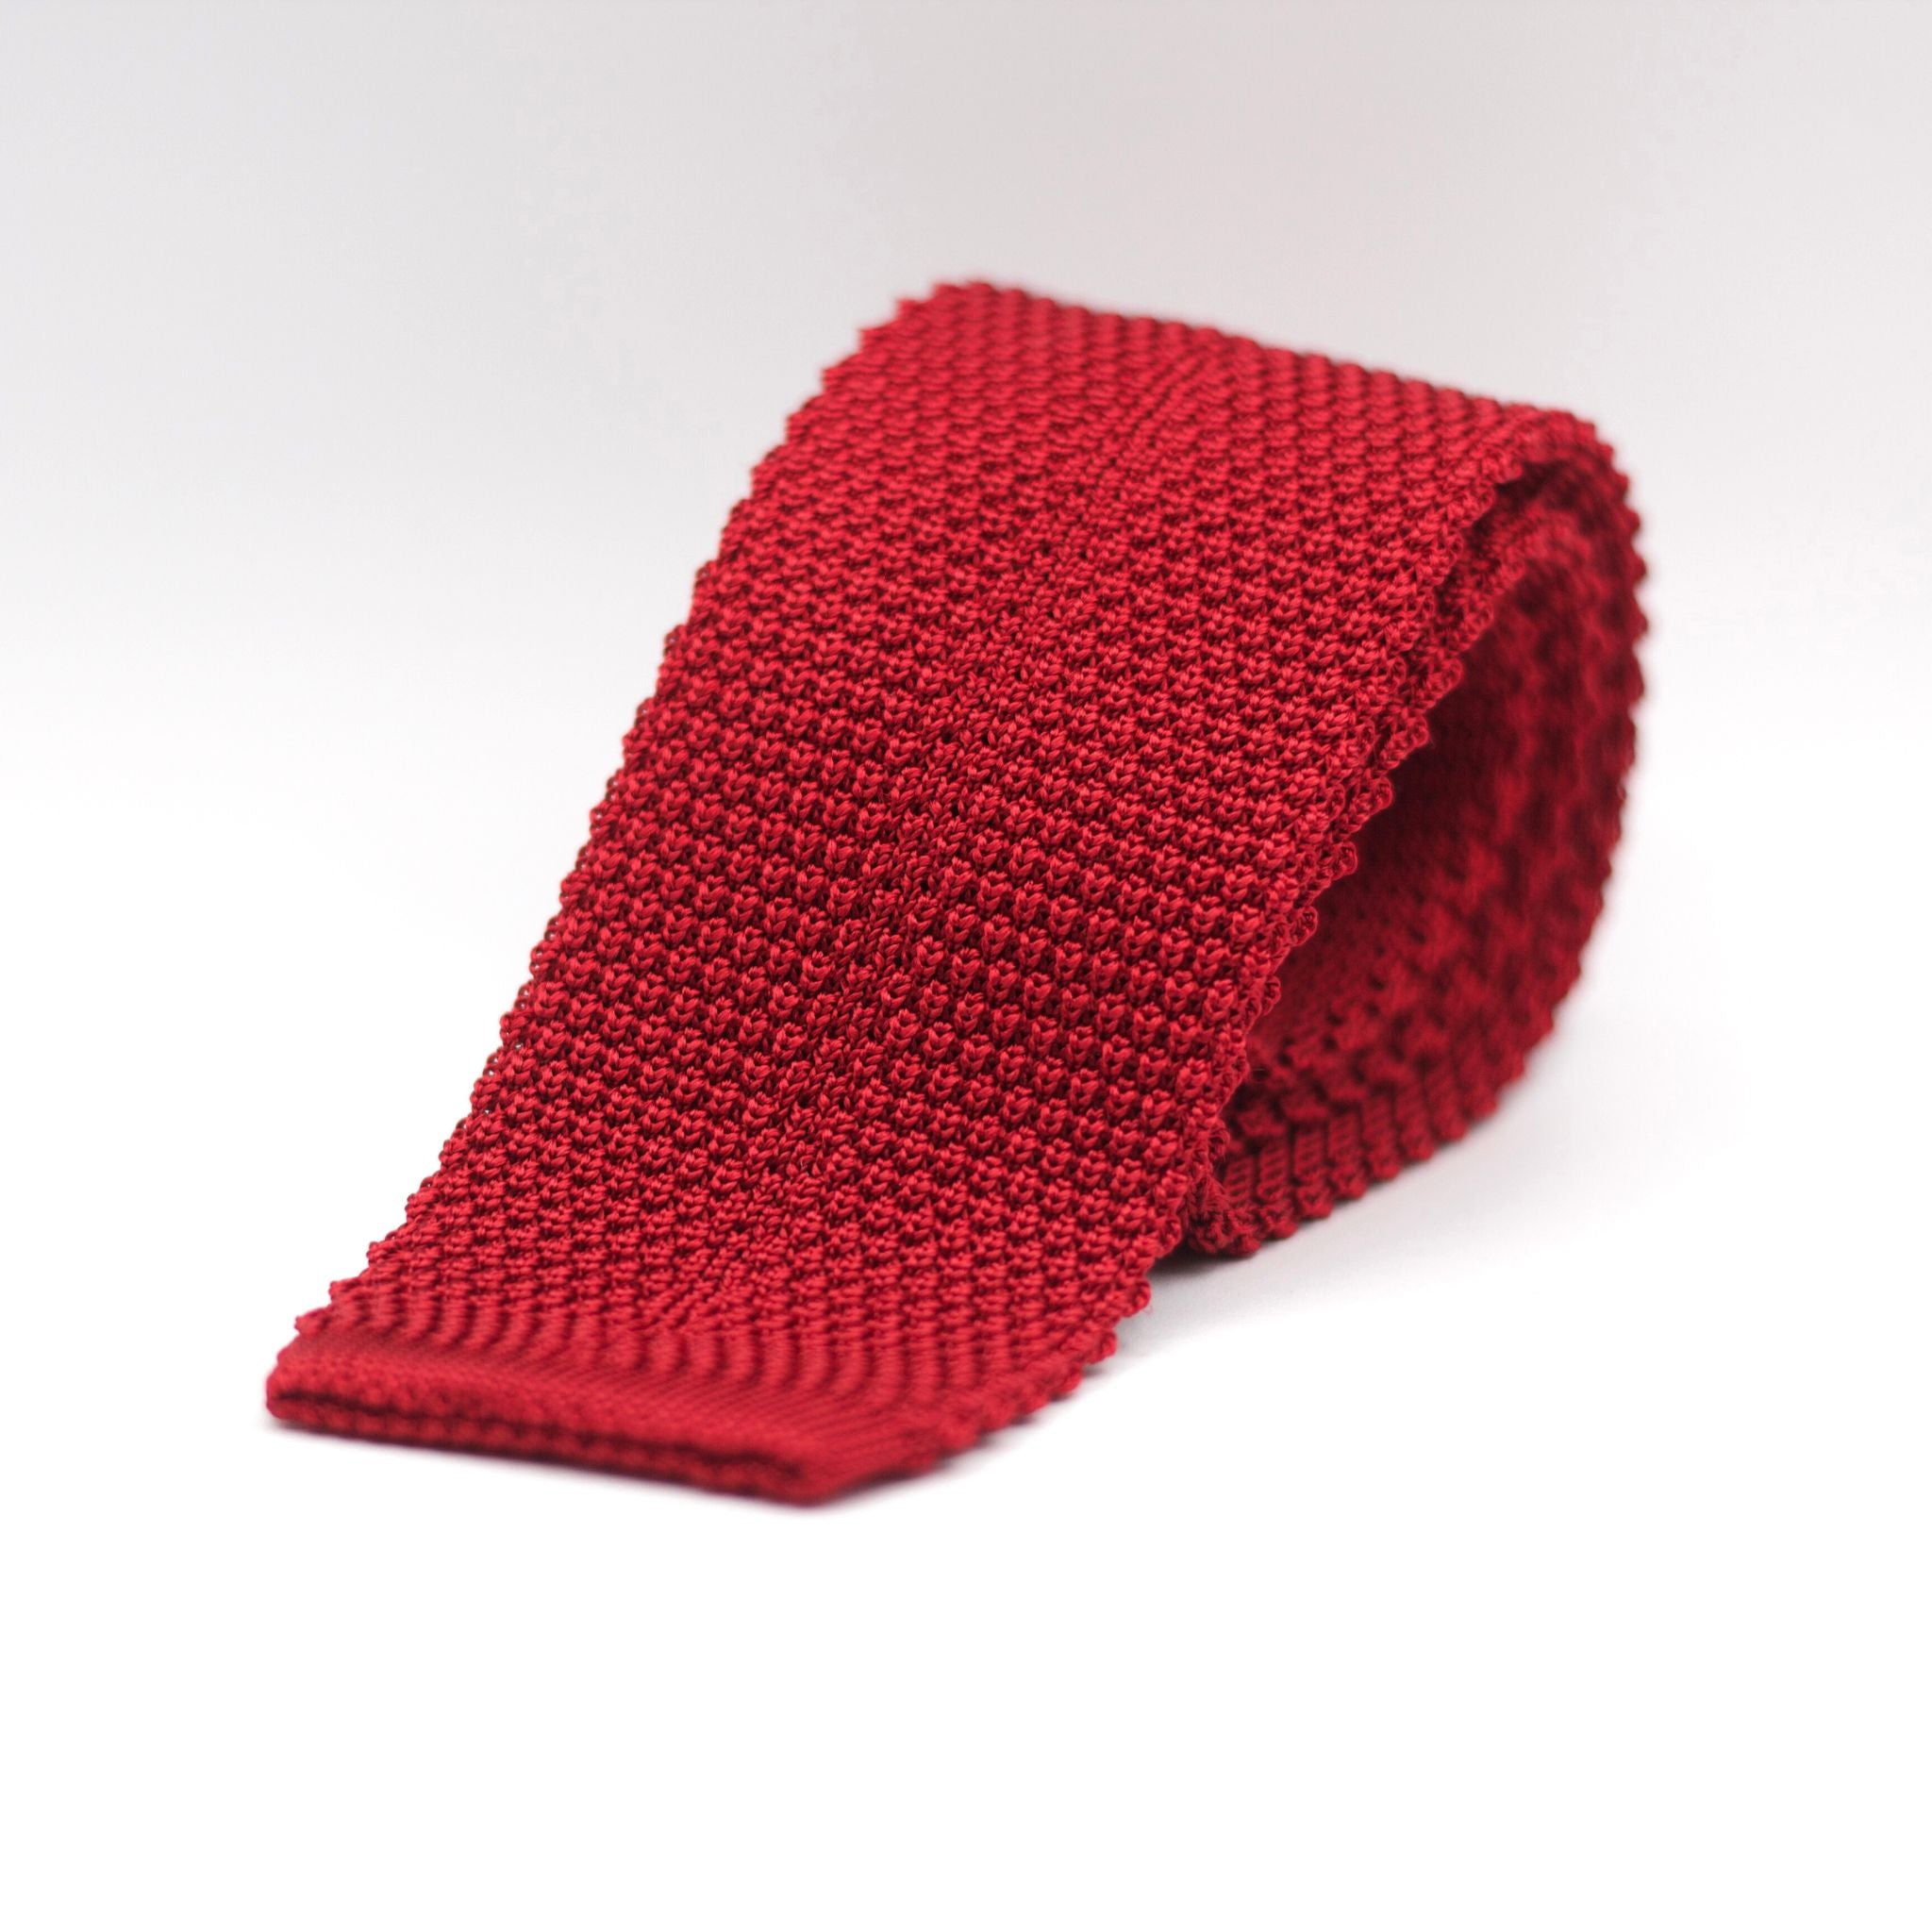 Cruciani & Bella 100% Knitted Silk Red knitted tie Plain Tie Handmade in Italy 6 cm x 145 cm